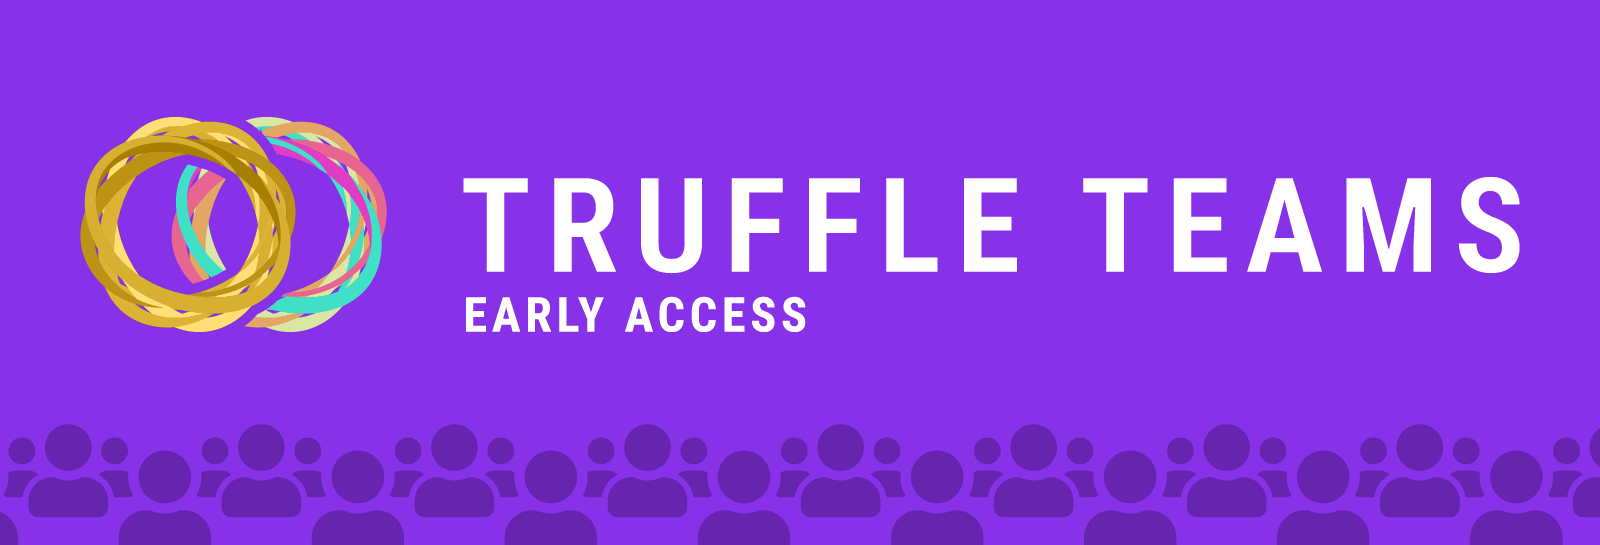 Truffle Teams Early Access Banner